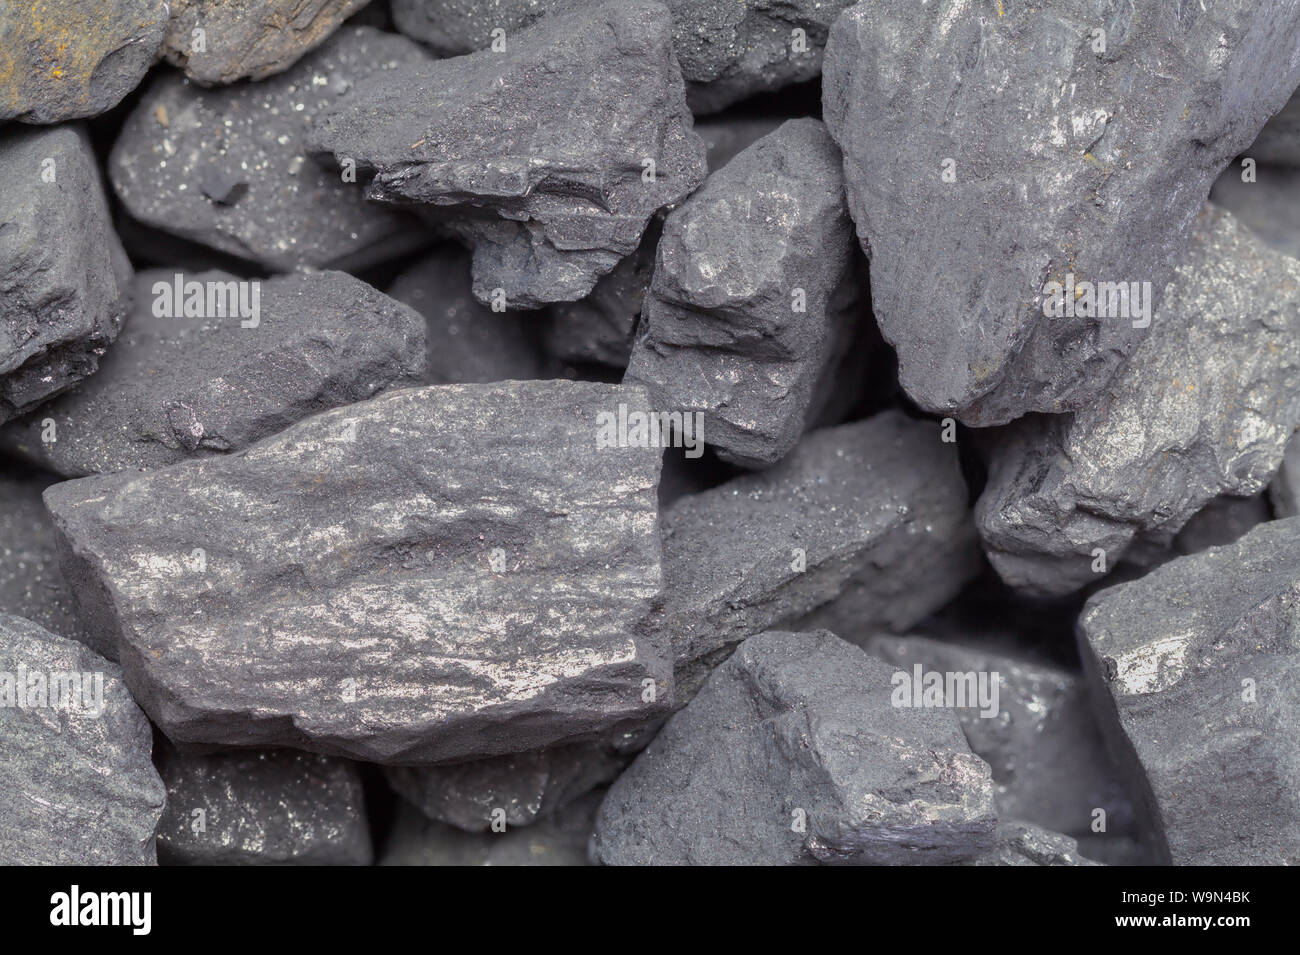 Fossil Fuel Coal Rocks Pile Background Close Up. Stock Photo